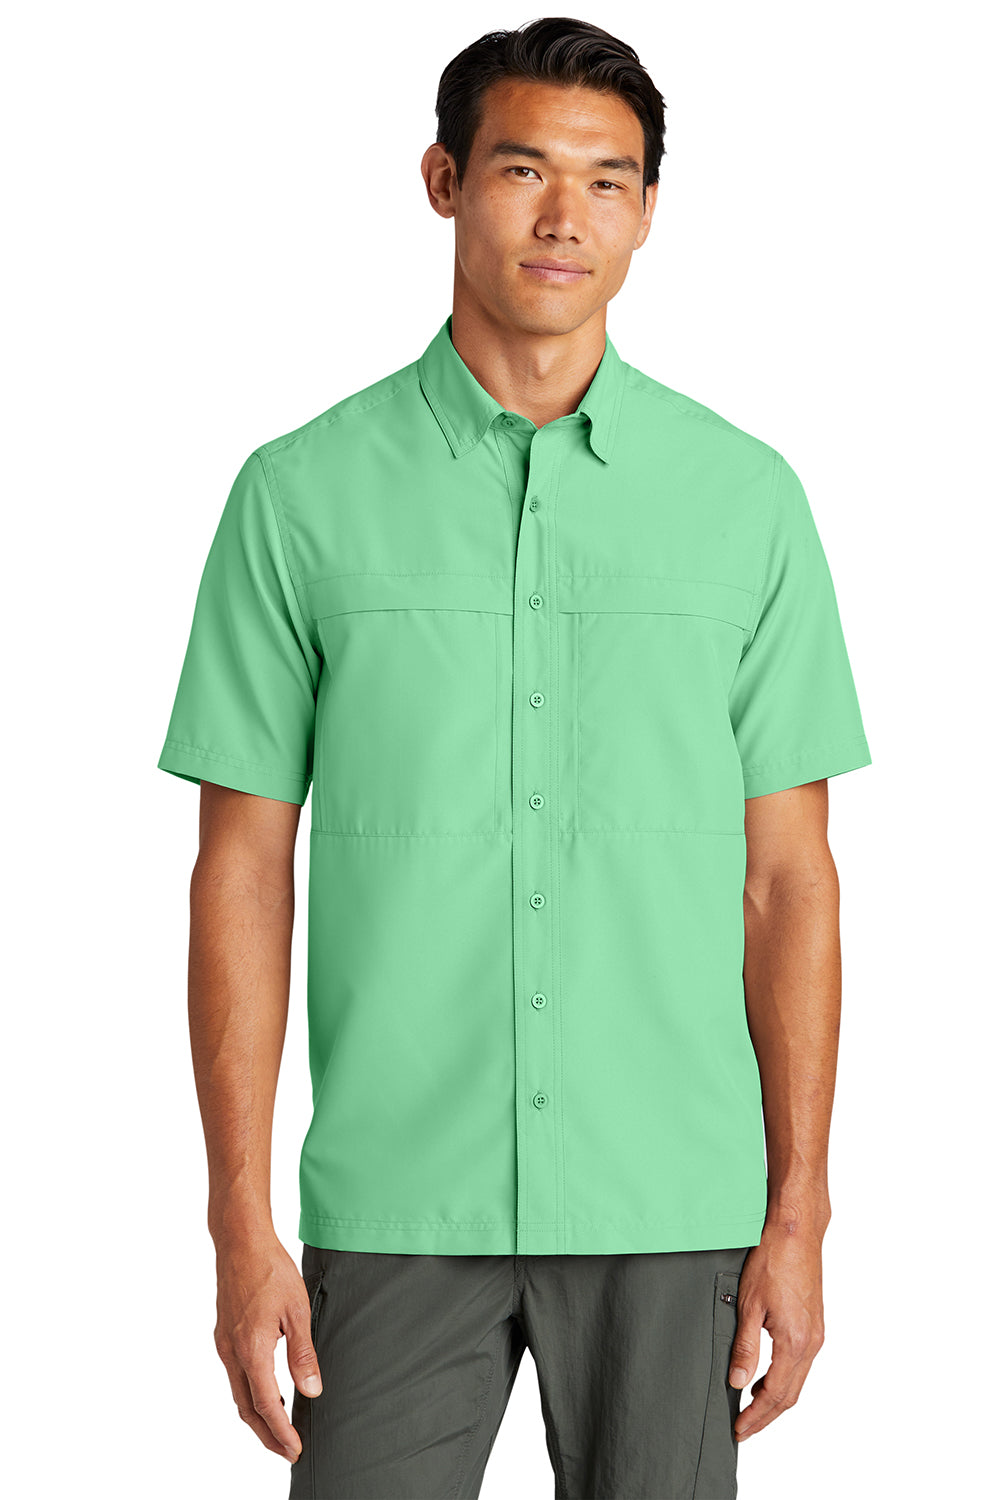 Port Authority W961 Mens Daybreak Moisture Wicking Short Sleeve Button Down Shirt w/ Double Pockets Bright Seafoam Green Front